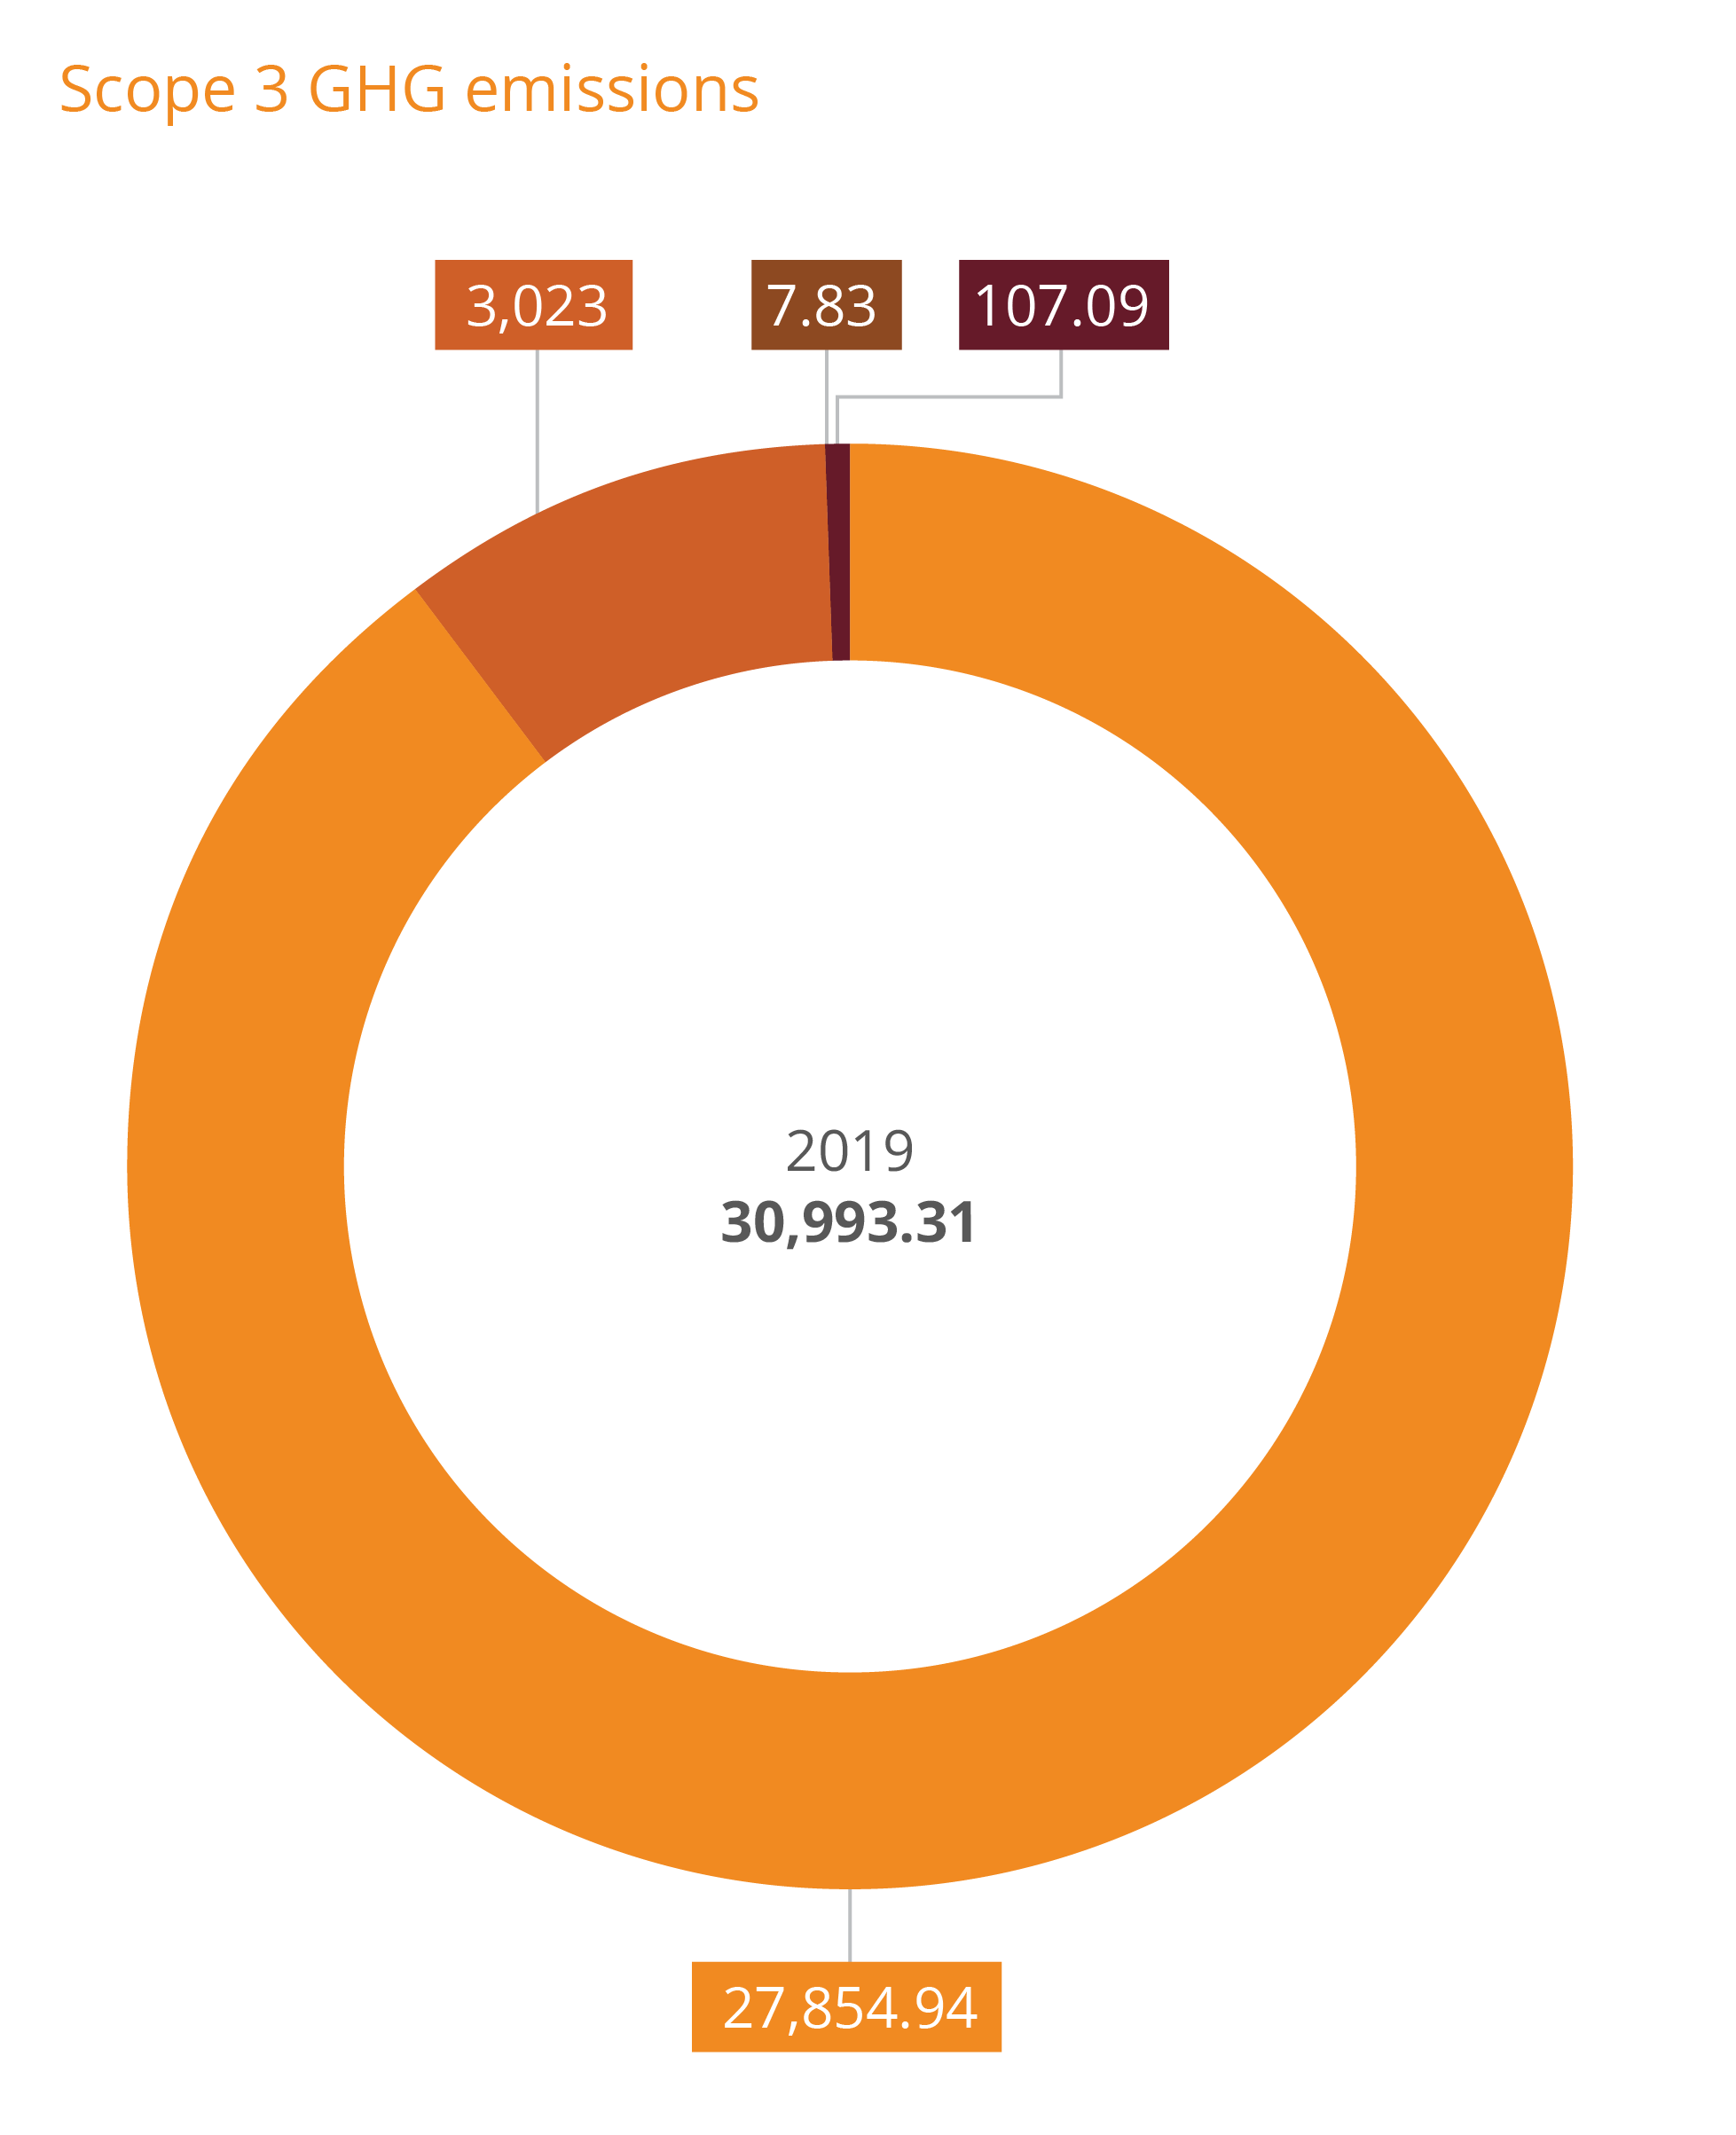 Pie chart of scope 3 greenhouse gas emissions